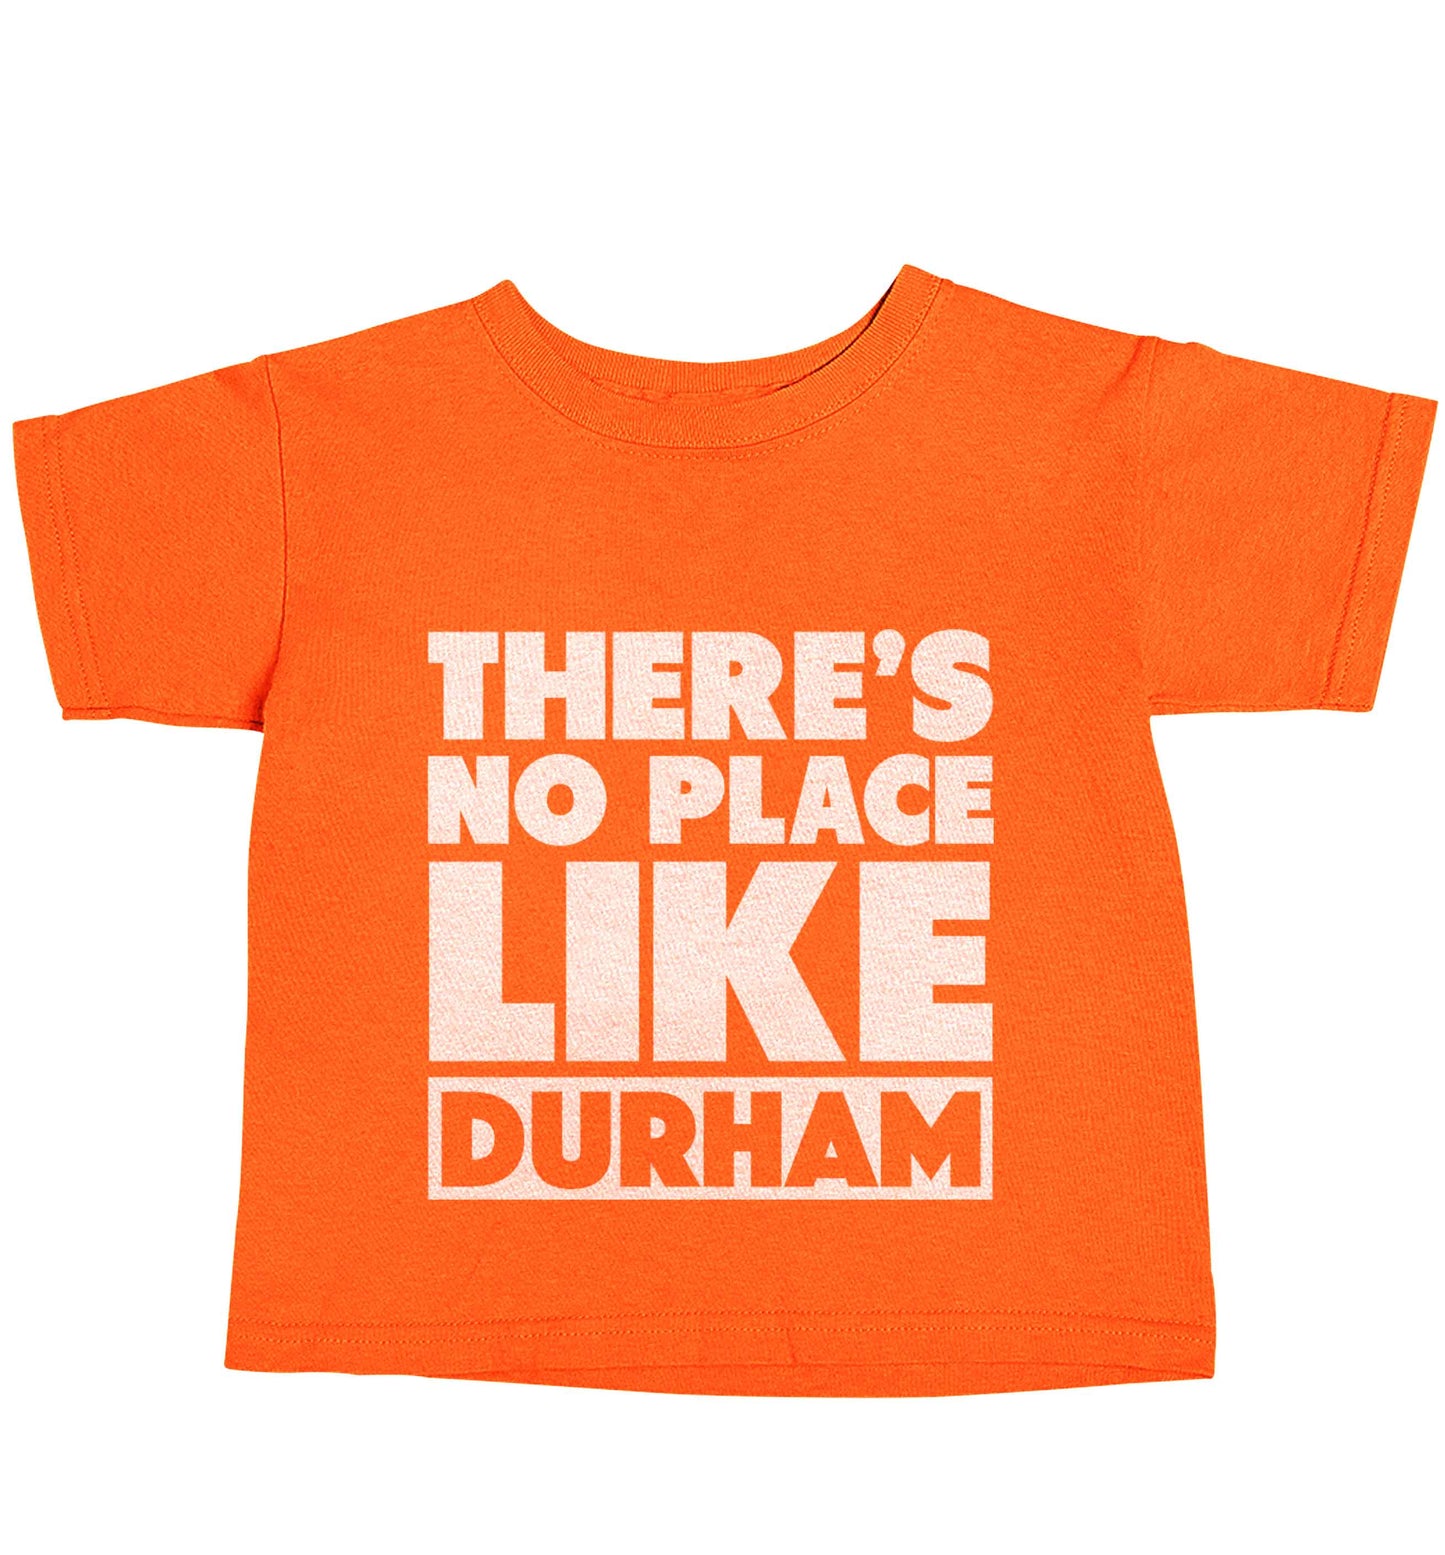 There's no place like Durham orange baby toddler Tshirt 2 Years